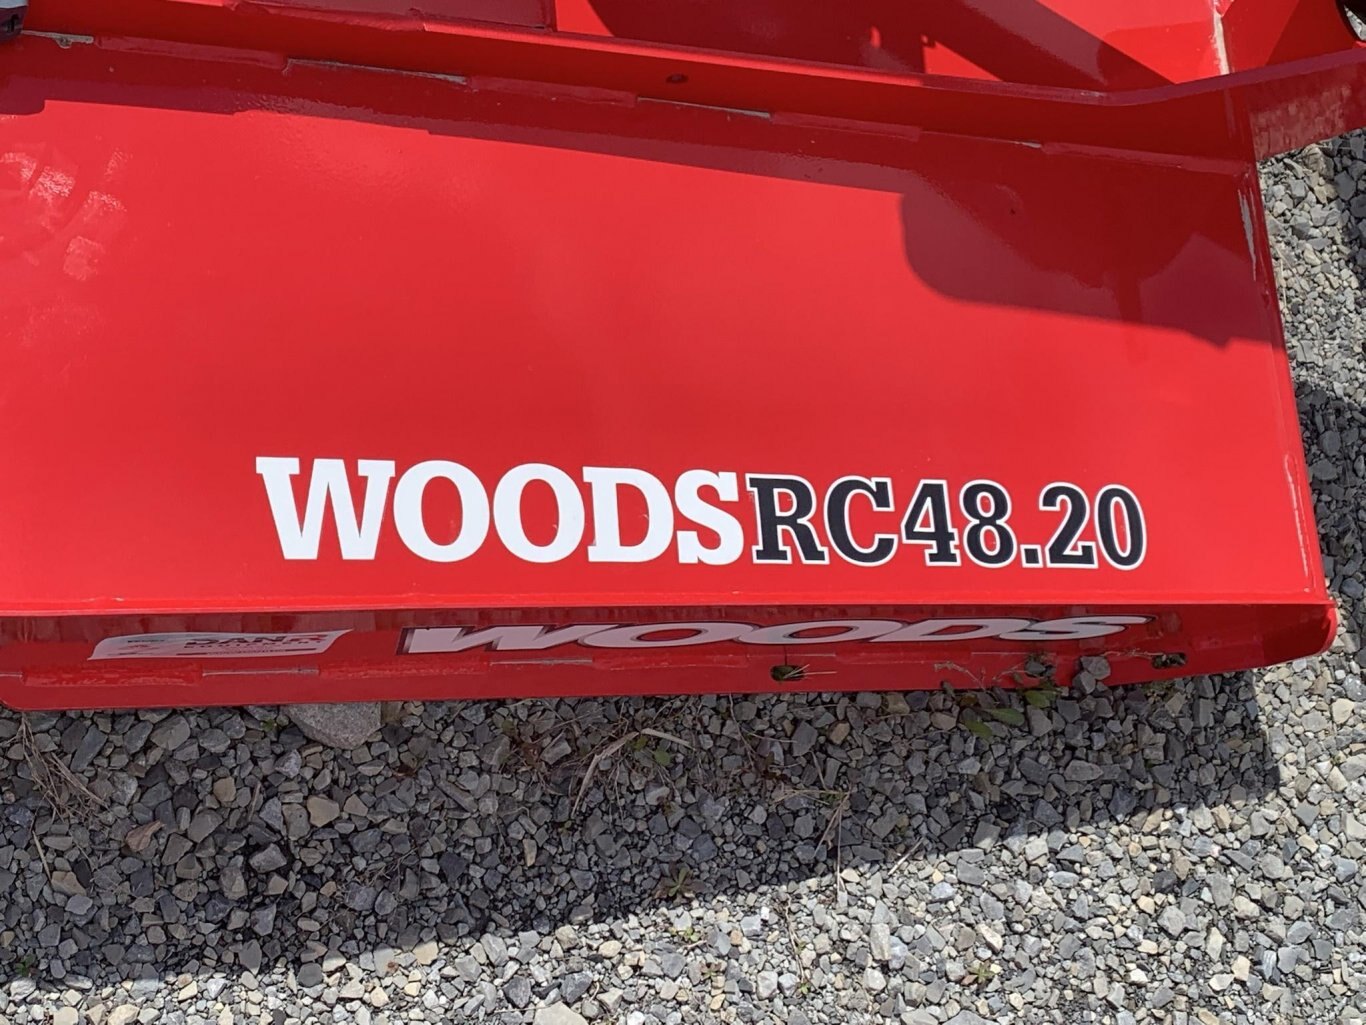 Woods RC48.20 Standard Rotary Cutters